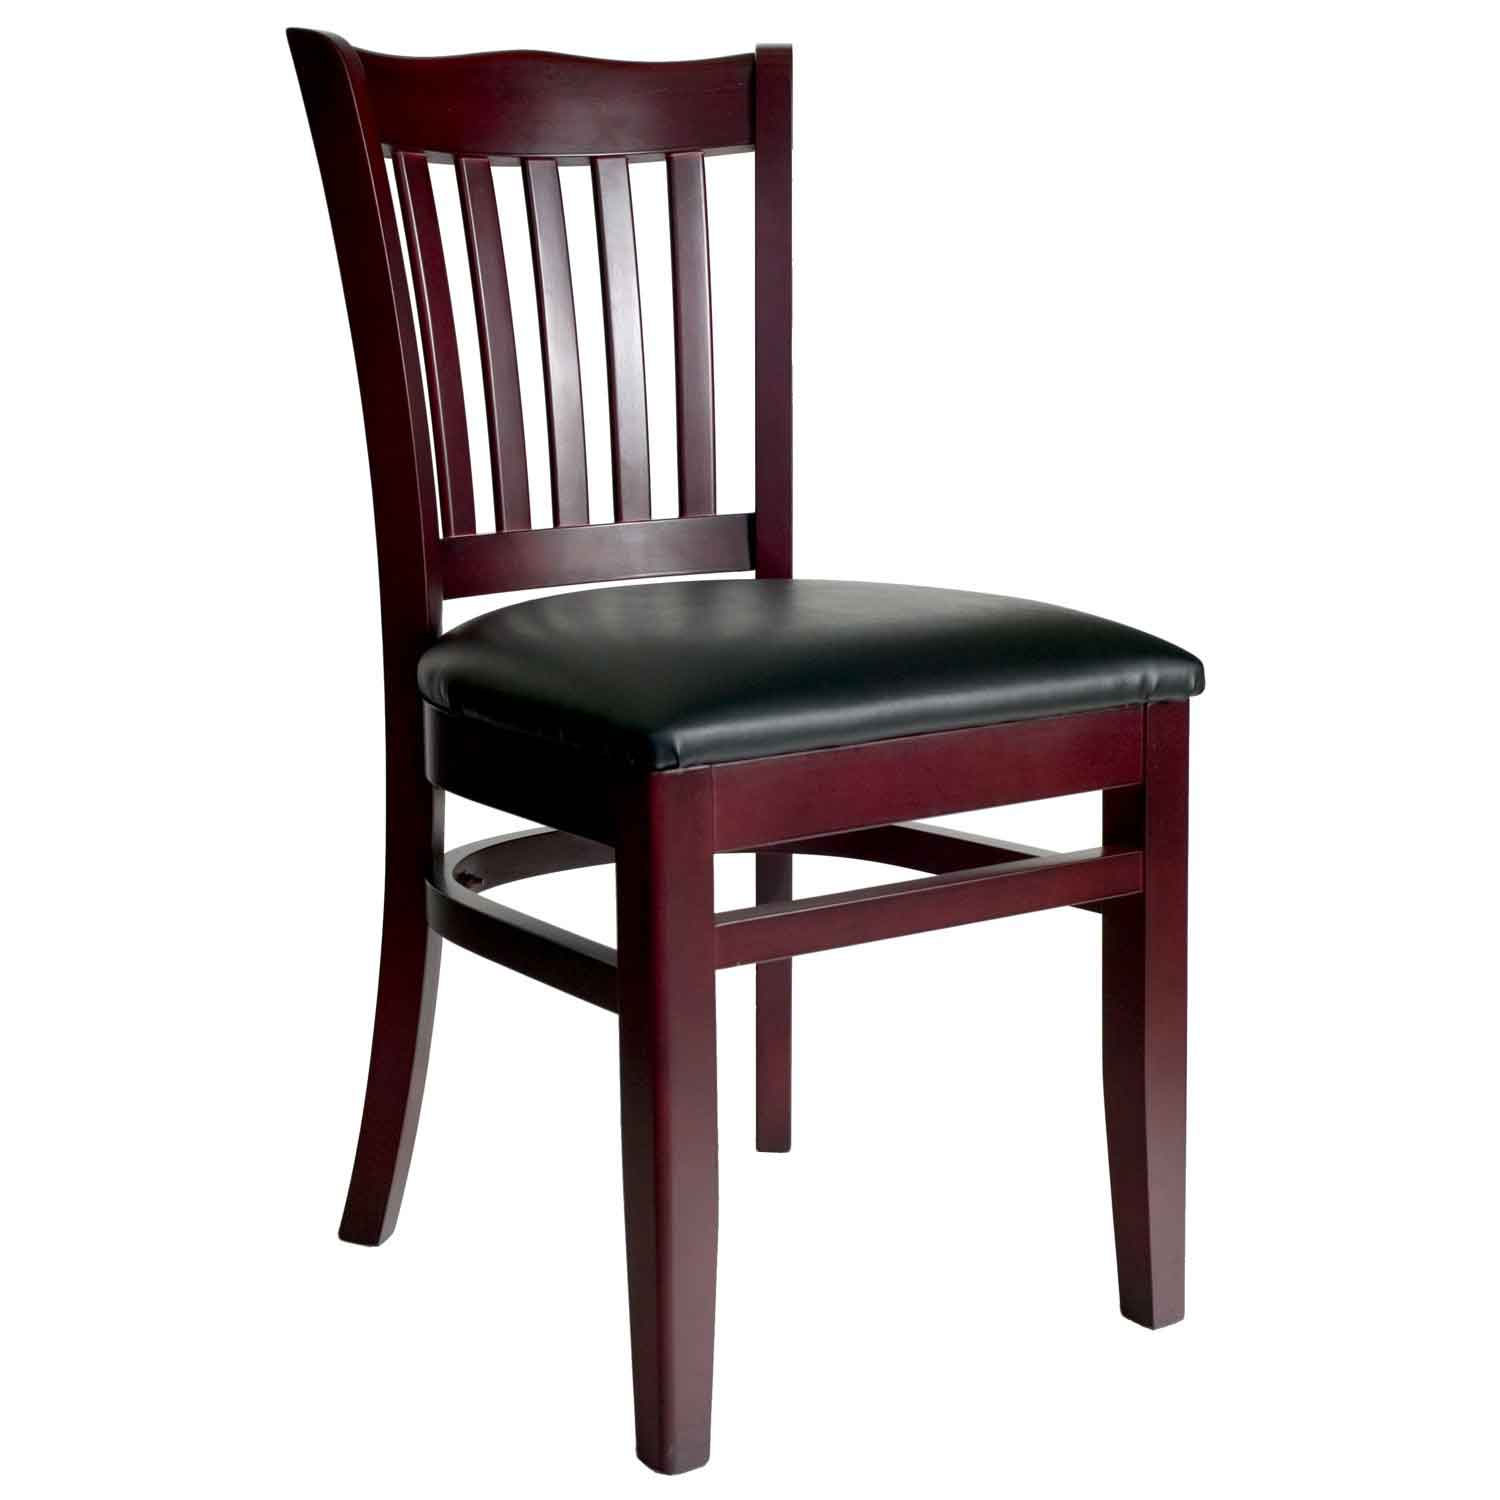 Folding Wooden Chair Product Review